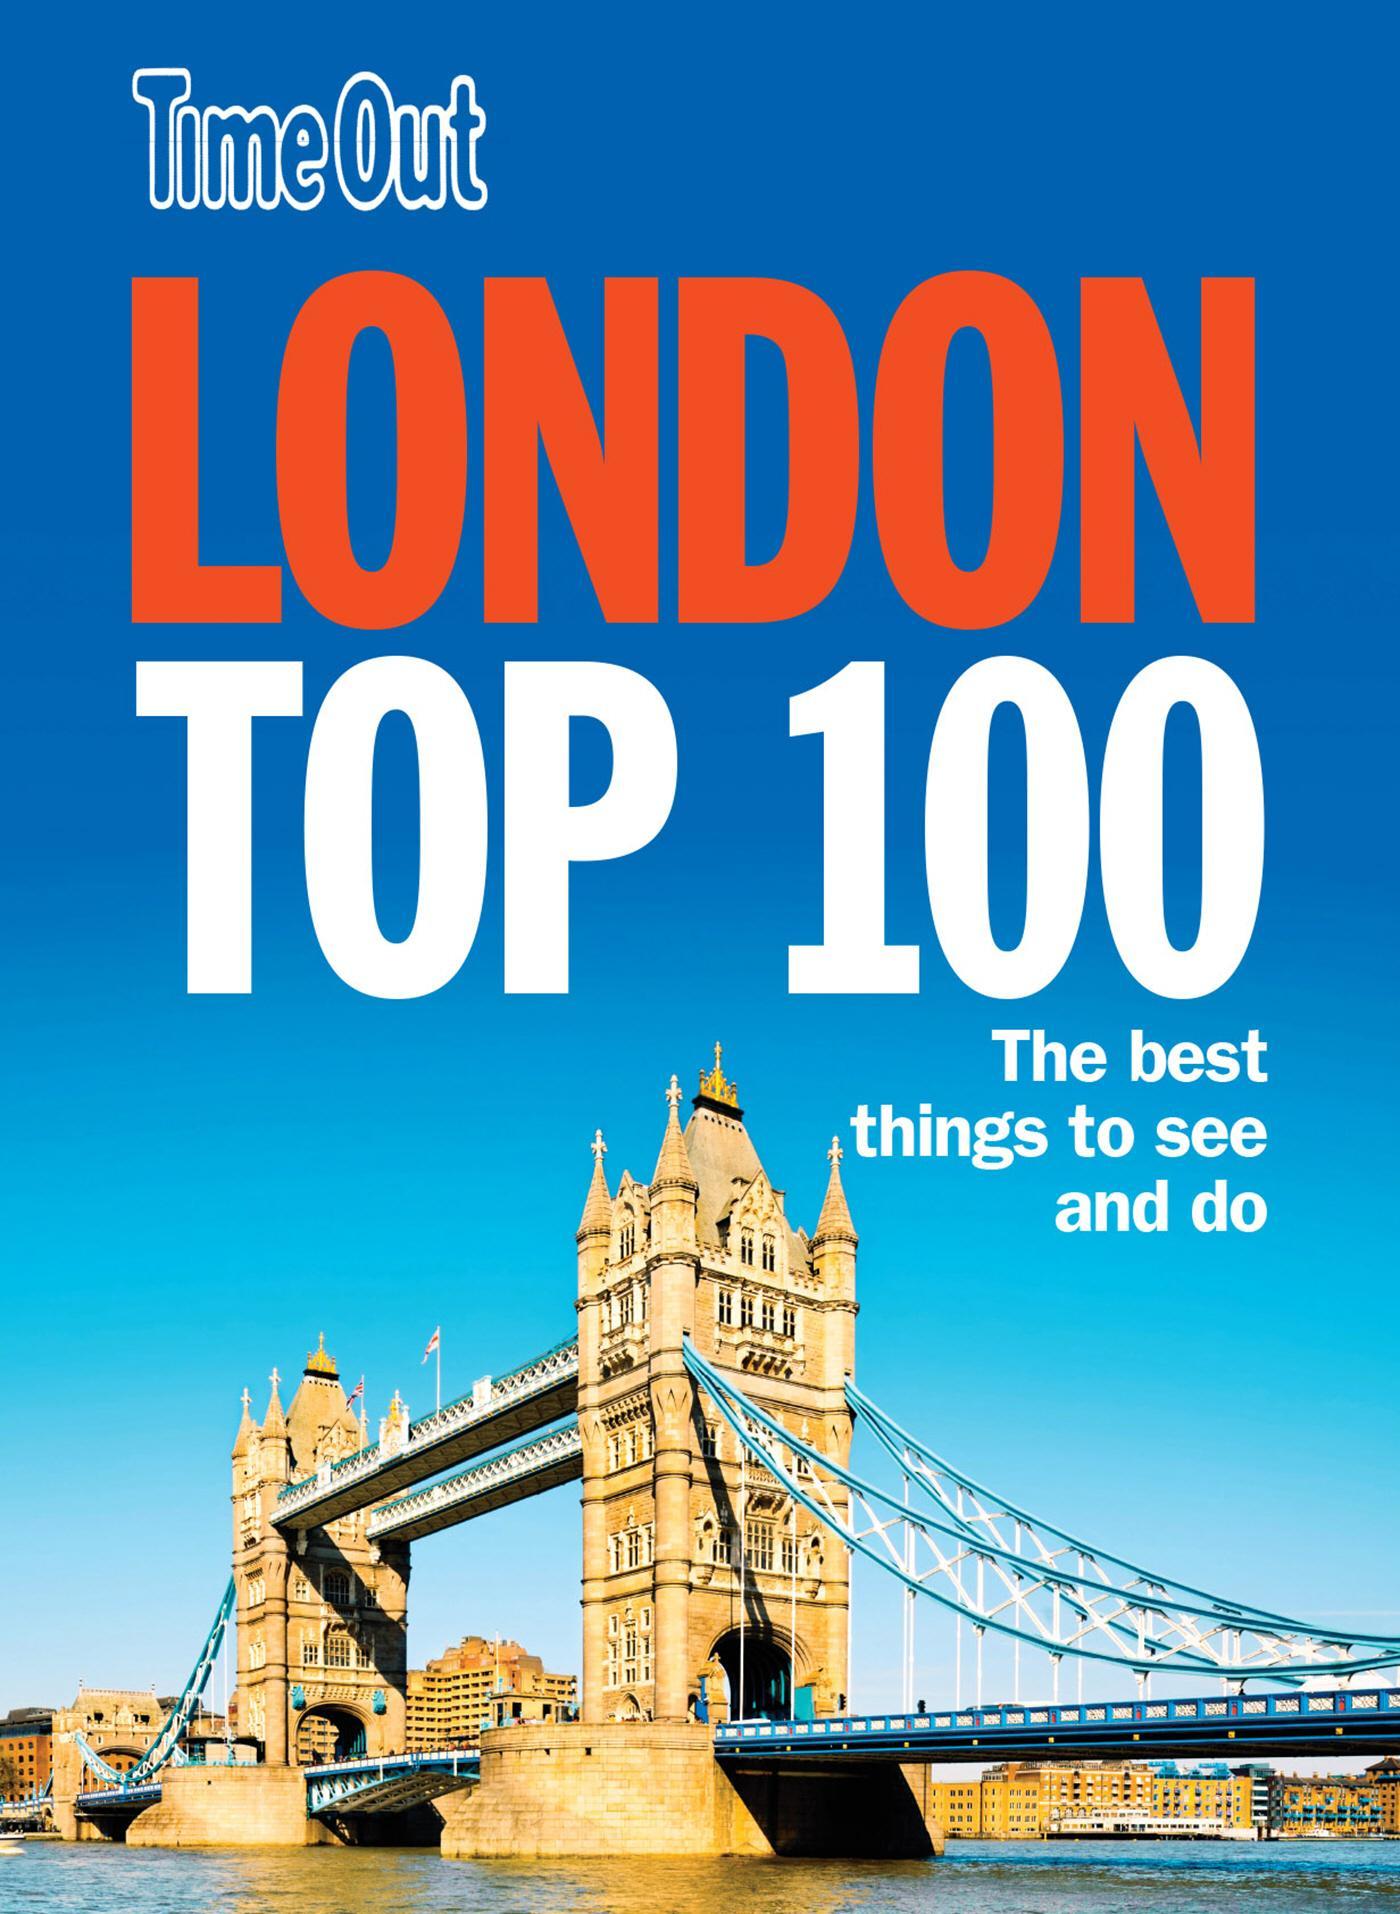 Time Out London Top 100 Out Guides, Time Urmston